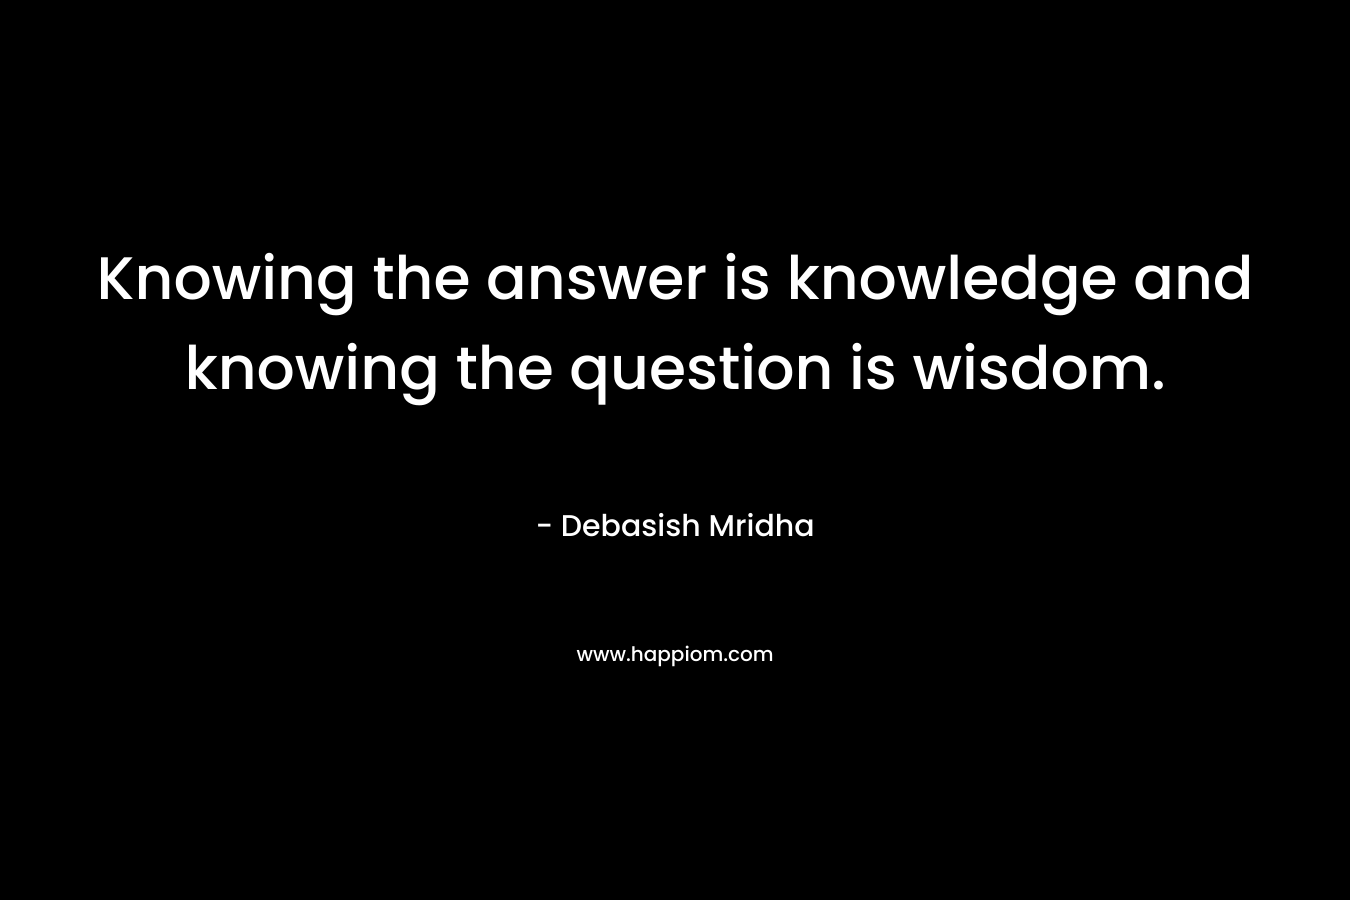 Knowing the answer is knowledge and knowing the question is wisdom.